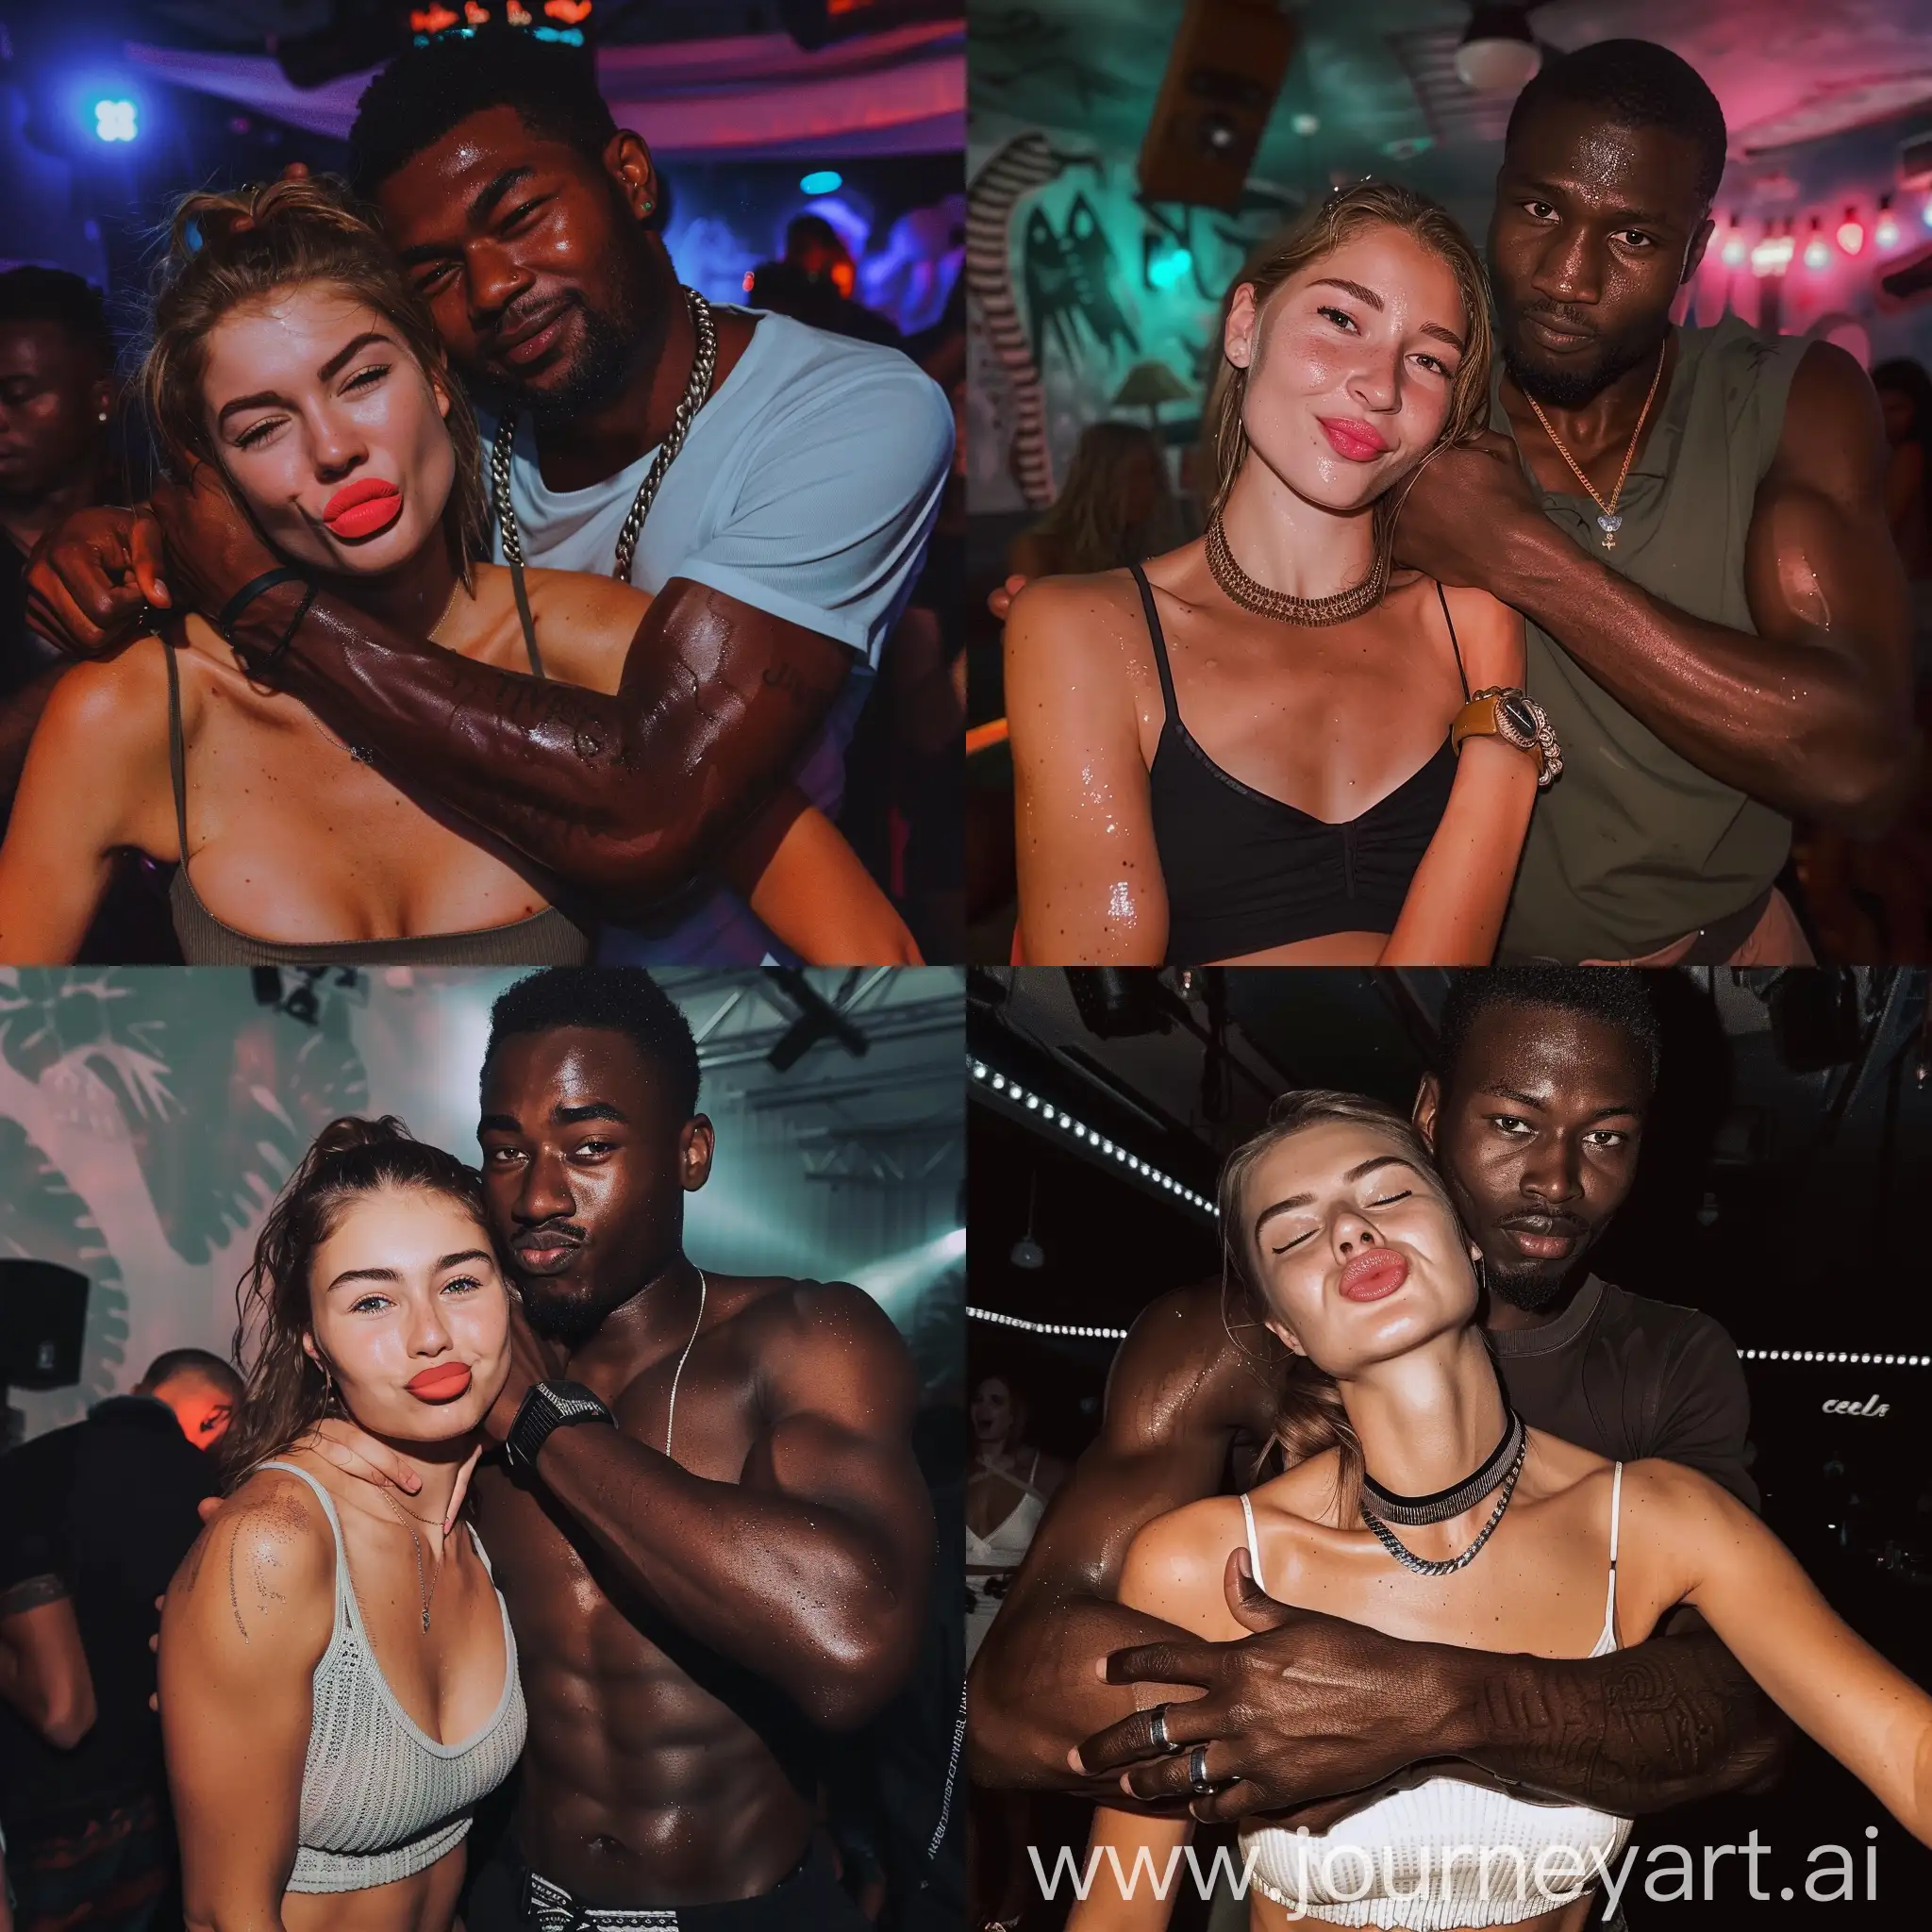 Flirtatious-German-Woman-Embraced-by-Tall-African-Partner-in-Party-Club-Selfie